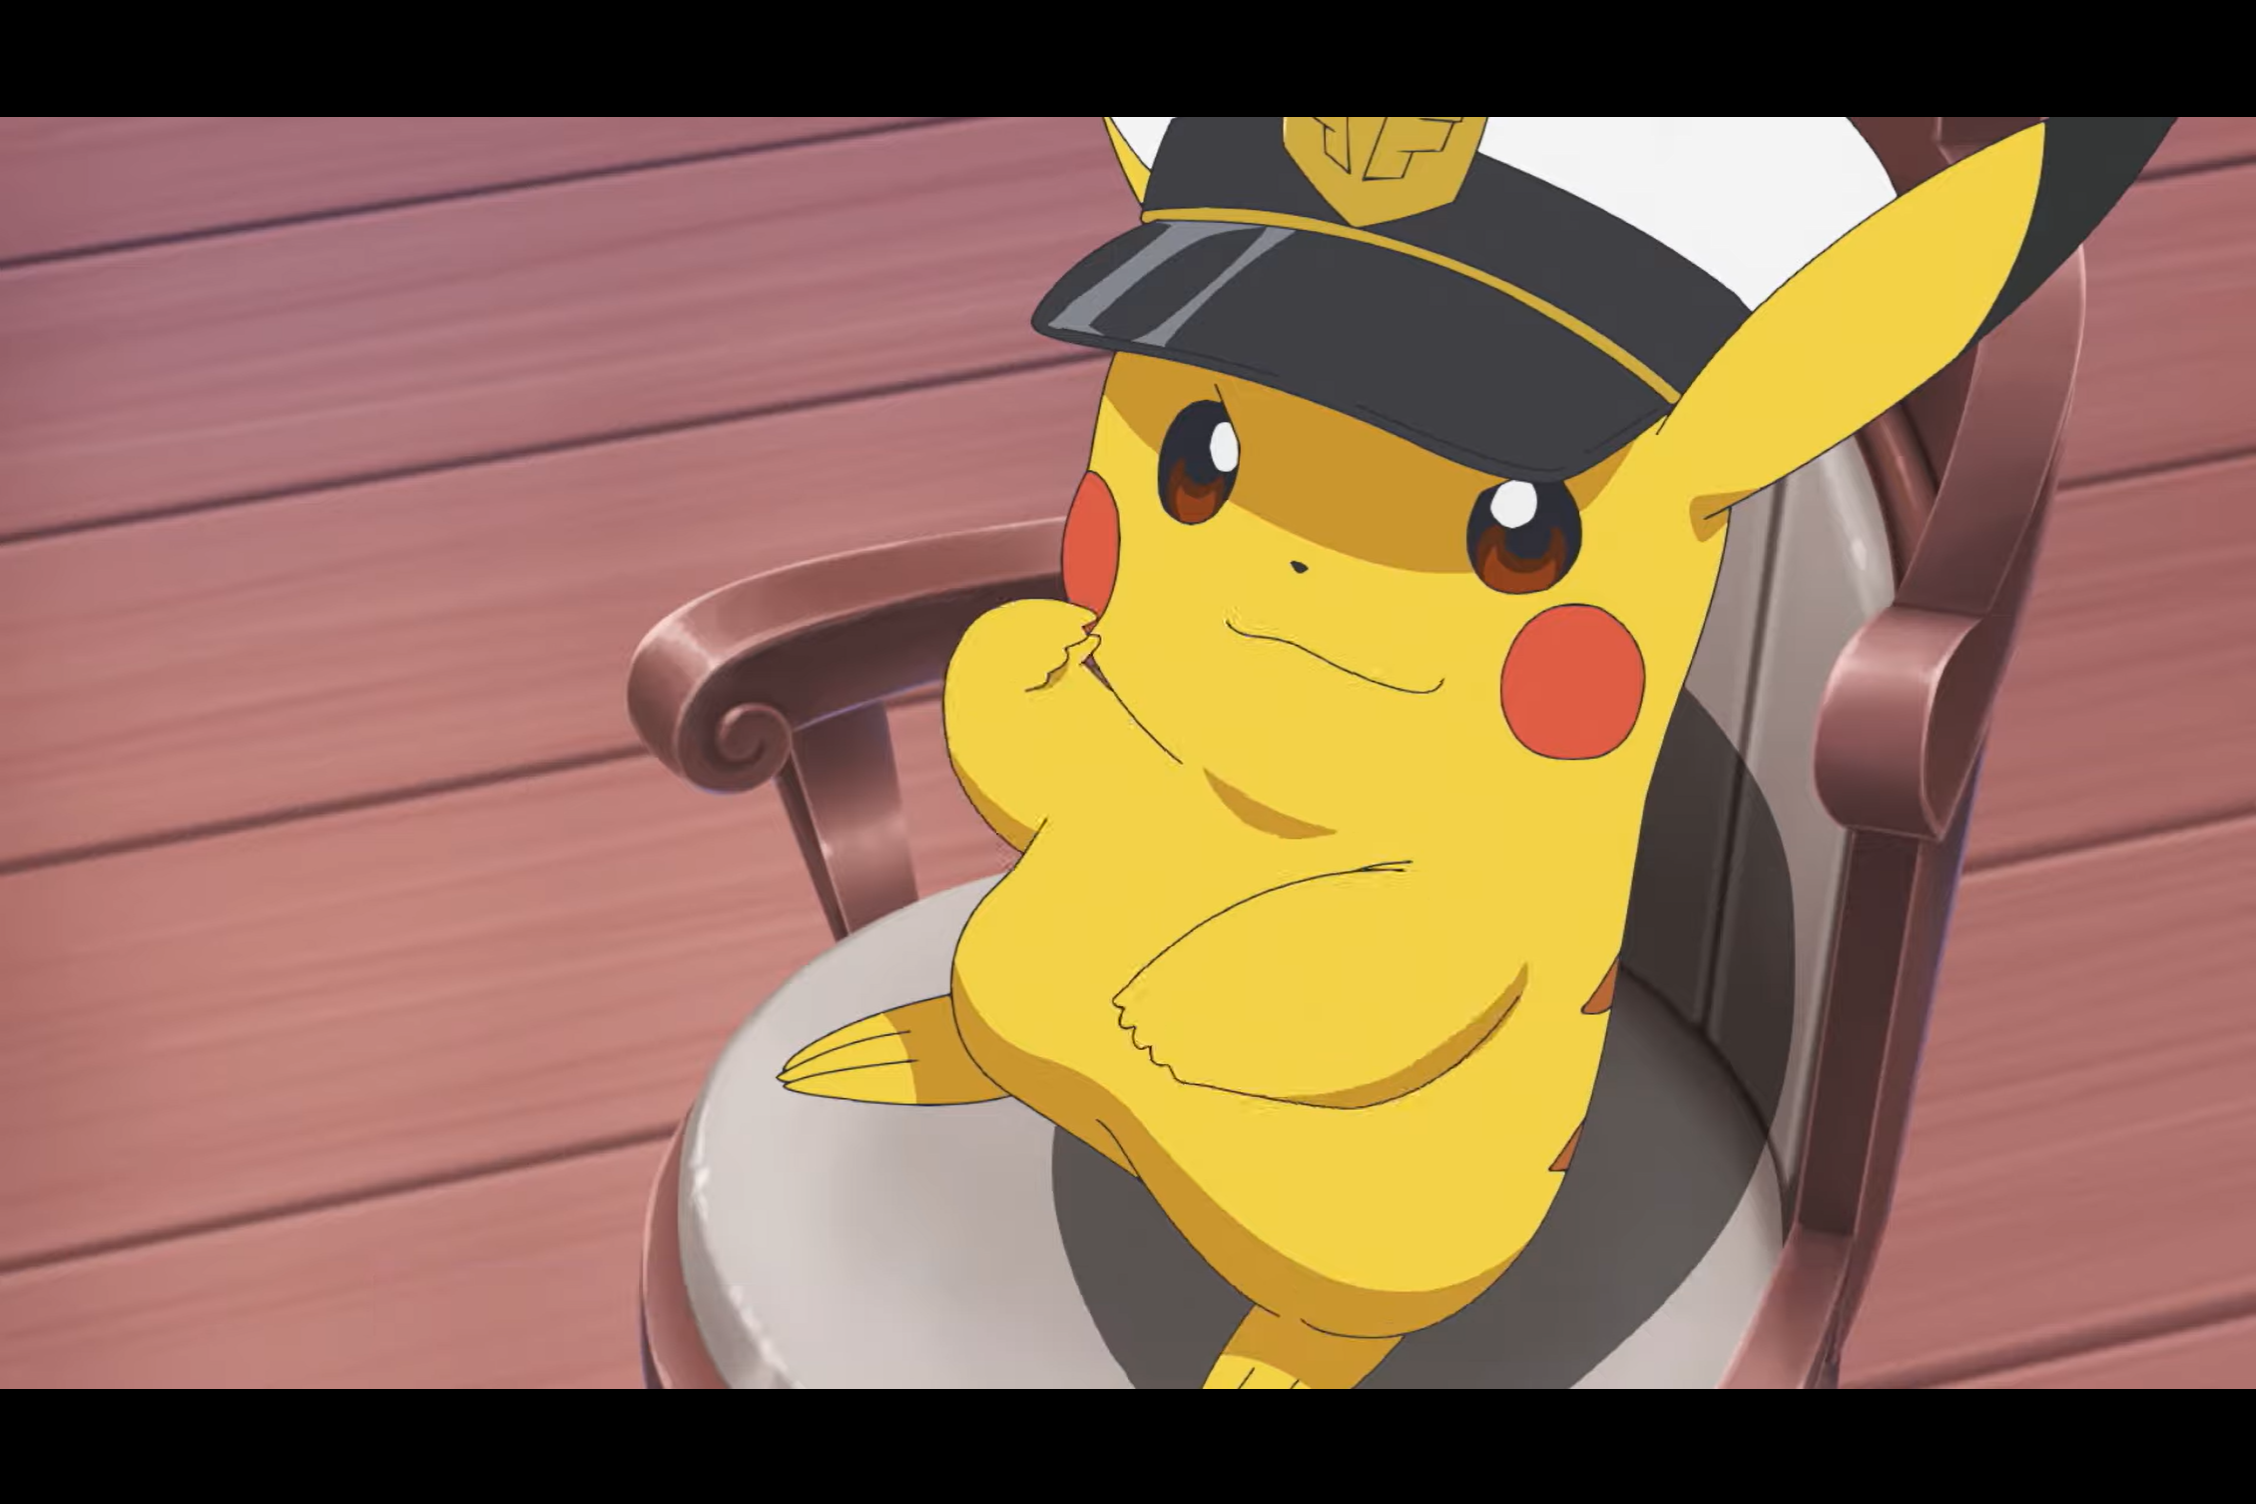 Pikachu wearing a captain’s hat, sitting in hair